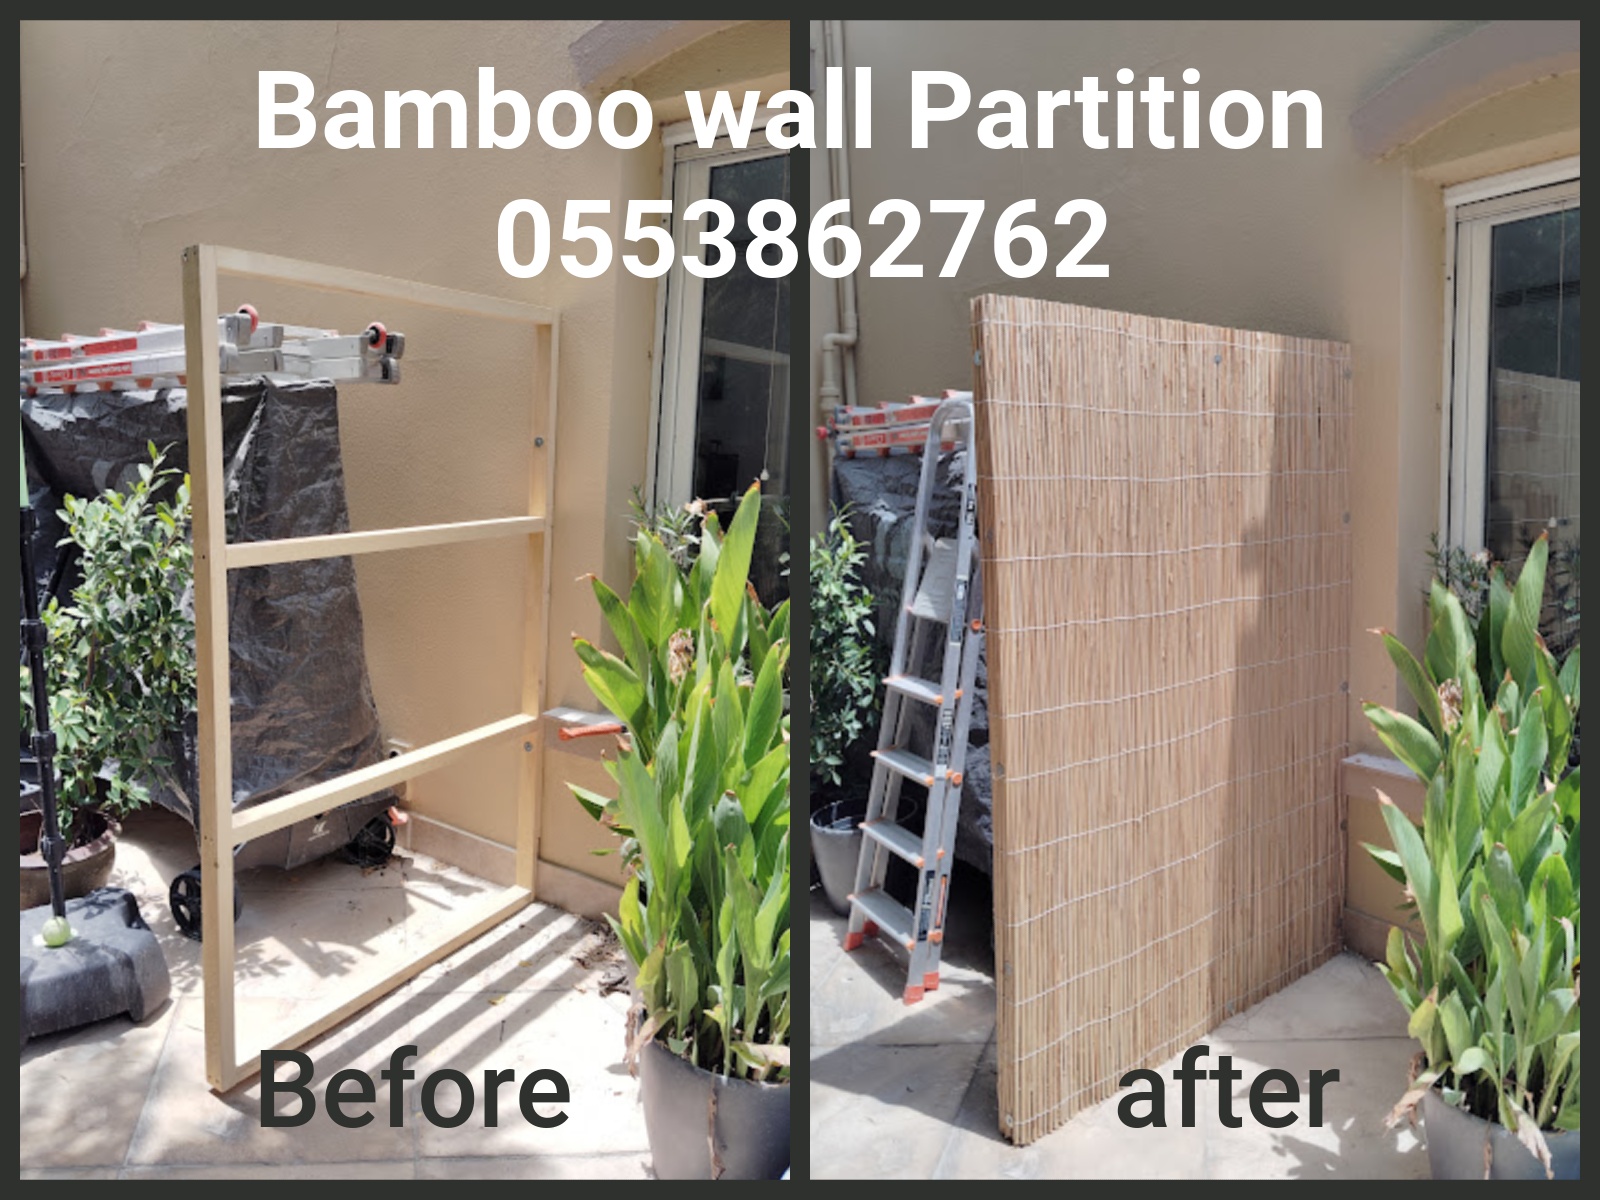 BAMBOO WALL PARTITION WORK